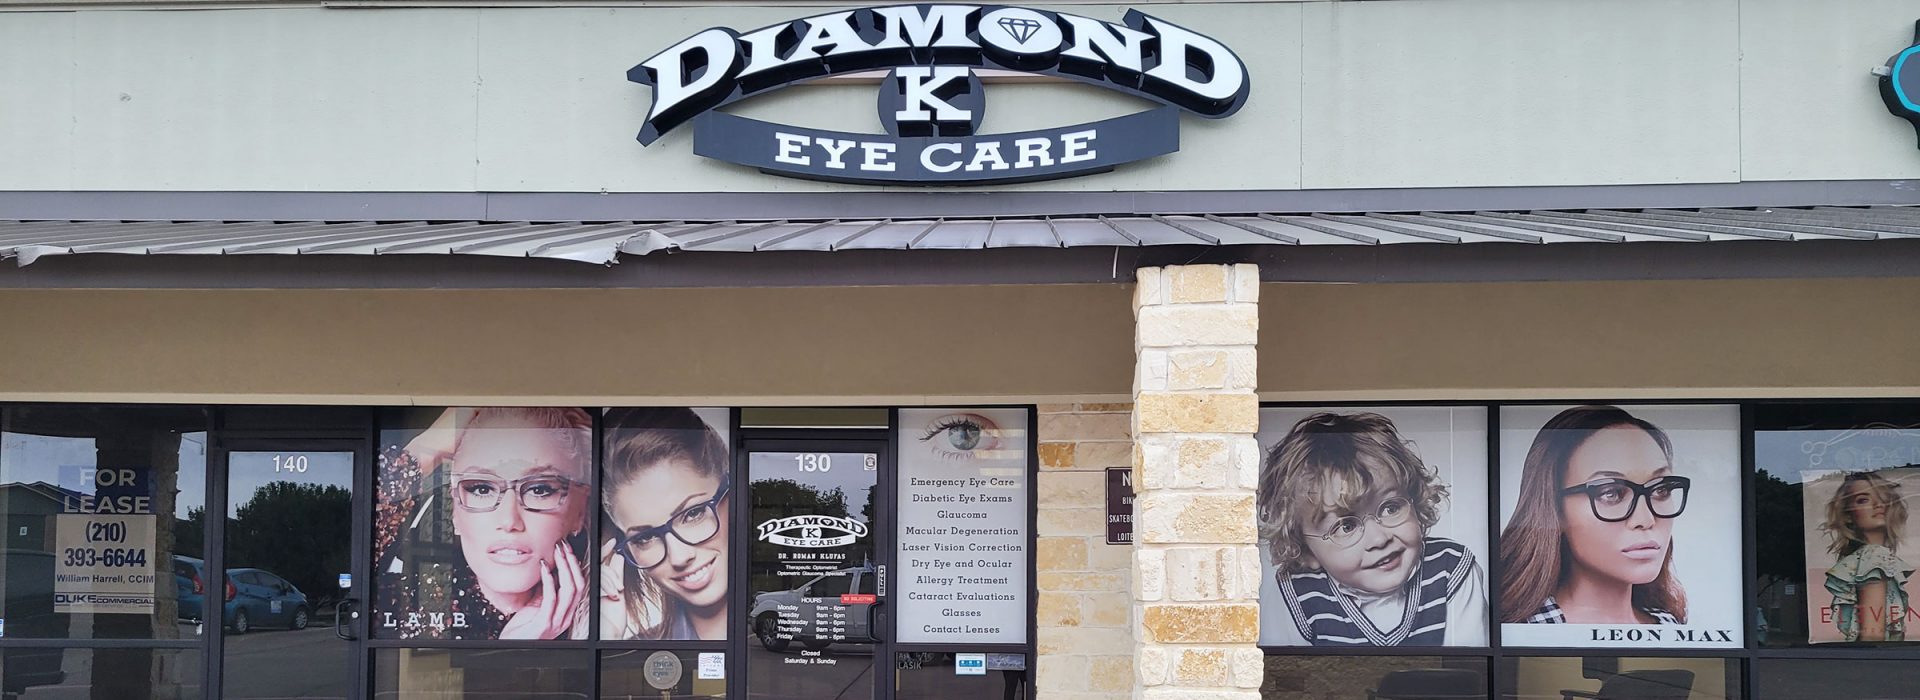 The front sign of Diamond K Eye Care